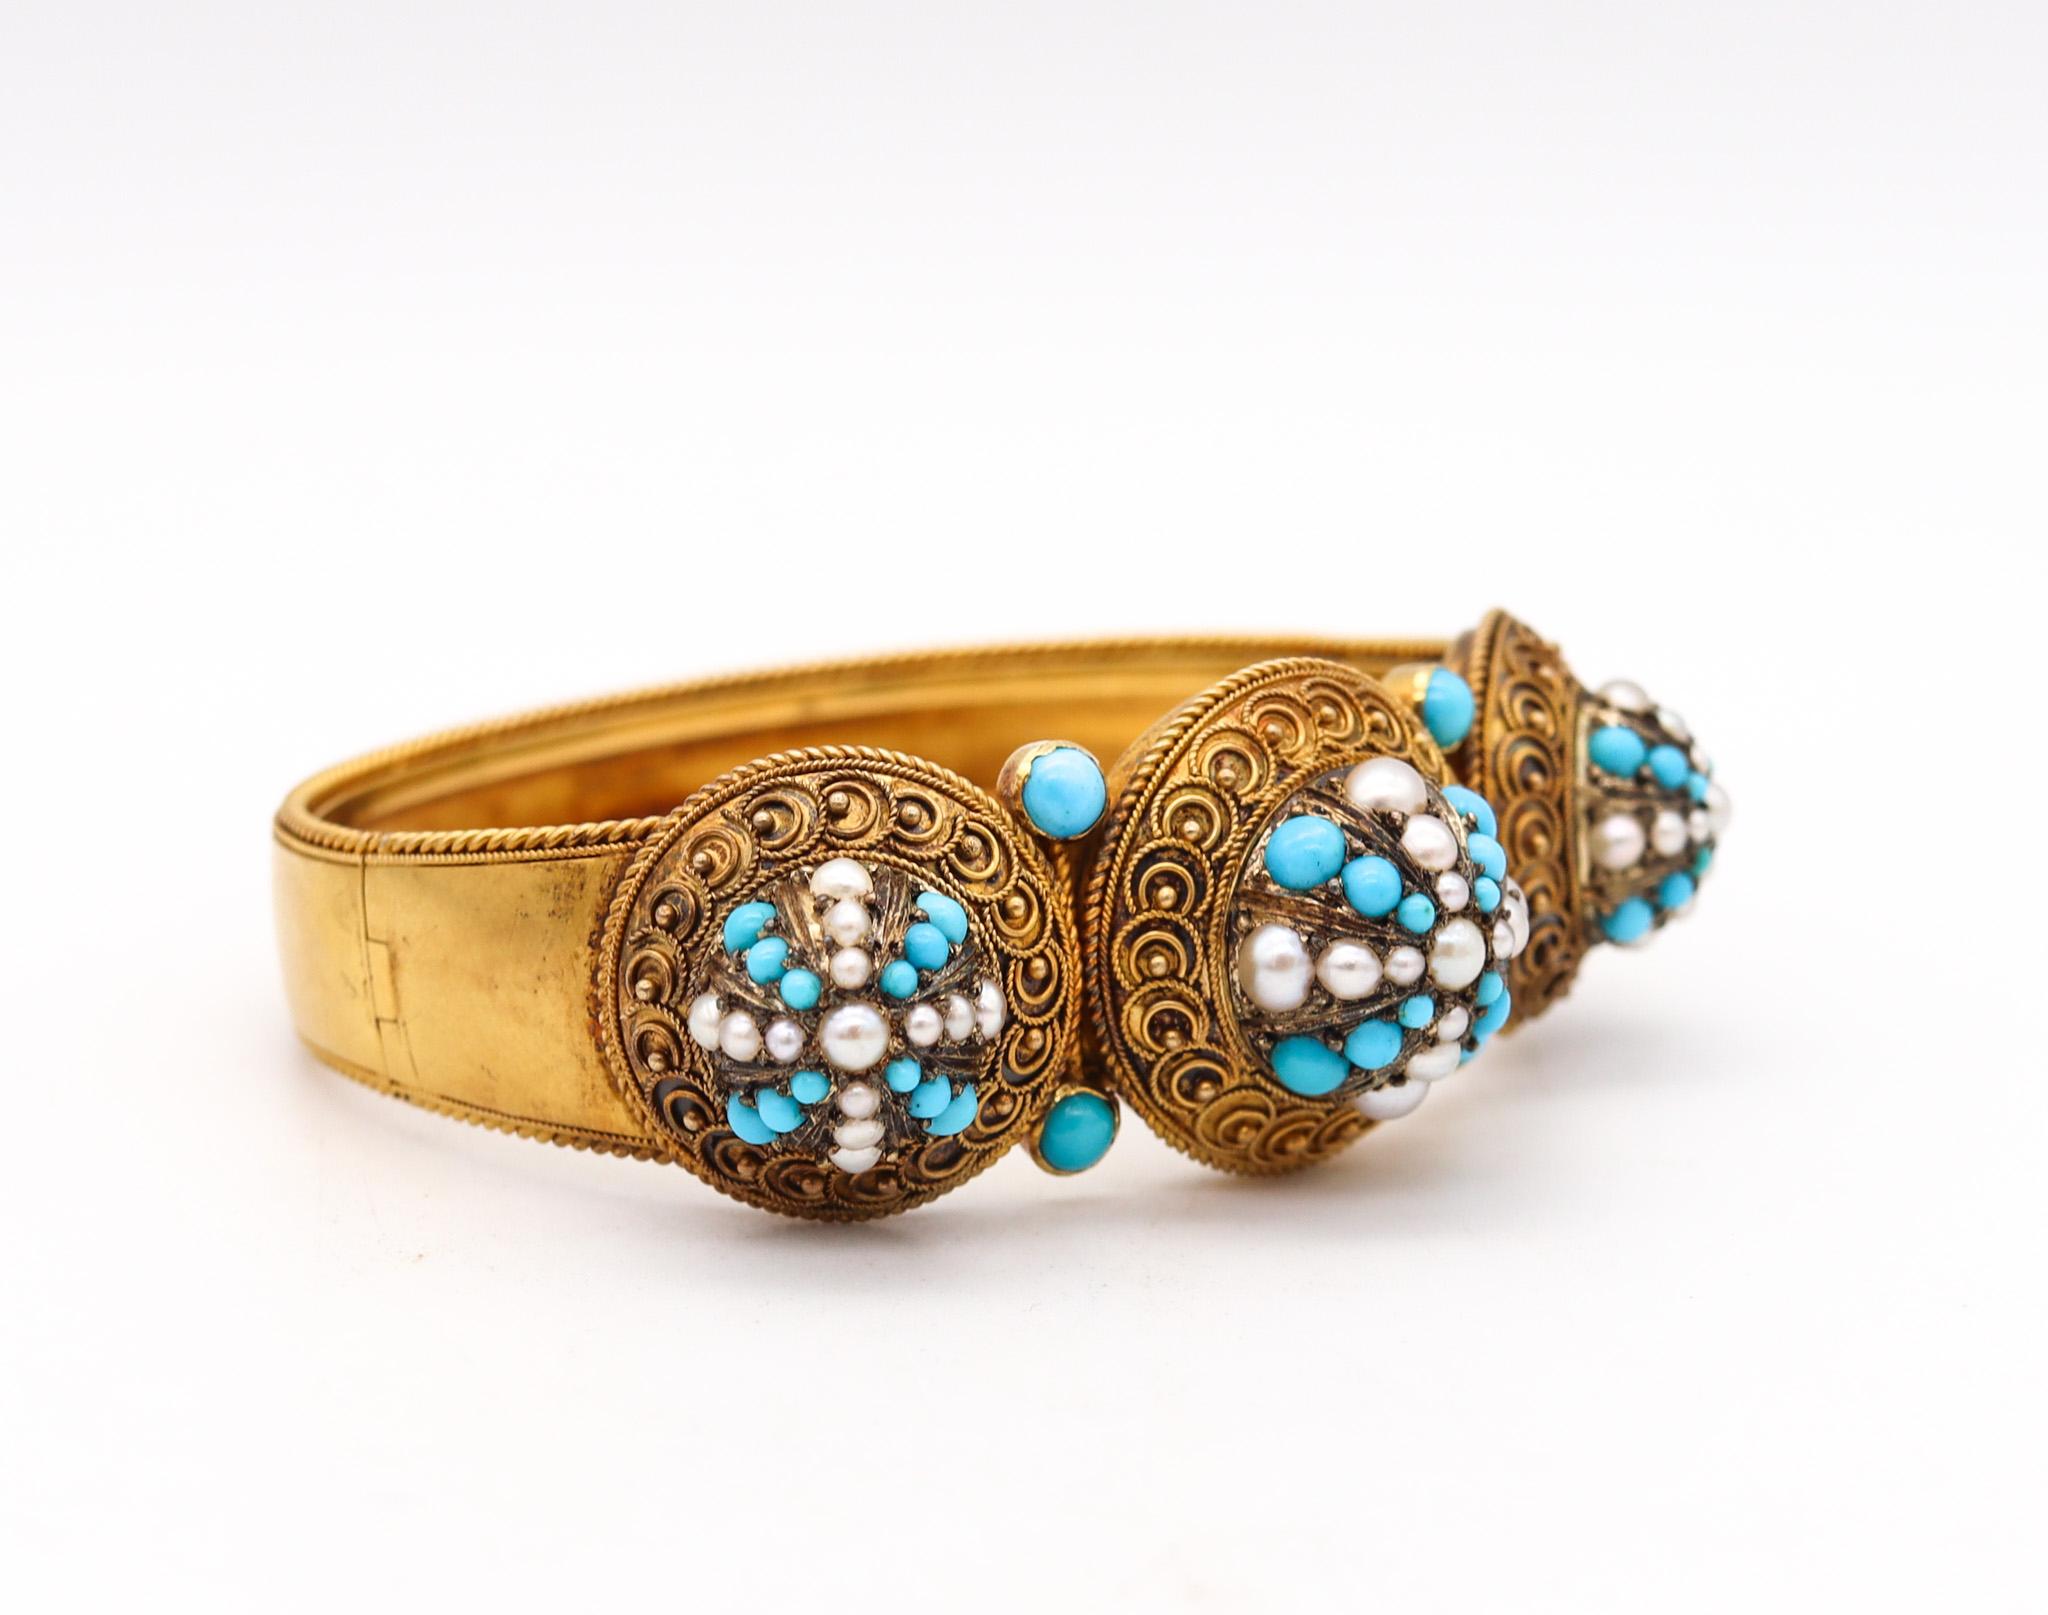 Cabochon Victorian 1880 Etruscan Revival Bracelet in 15kt Gold with Turquoises and Pearls For Sale